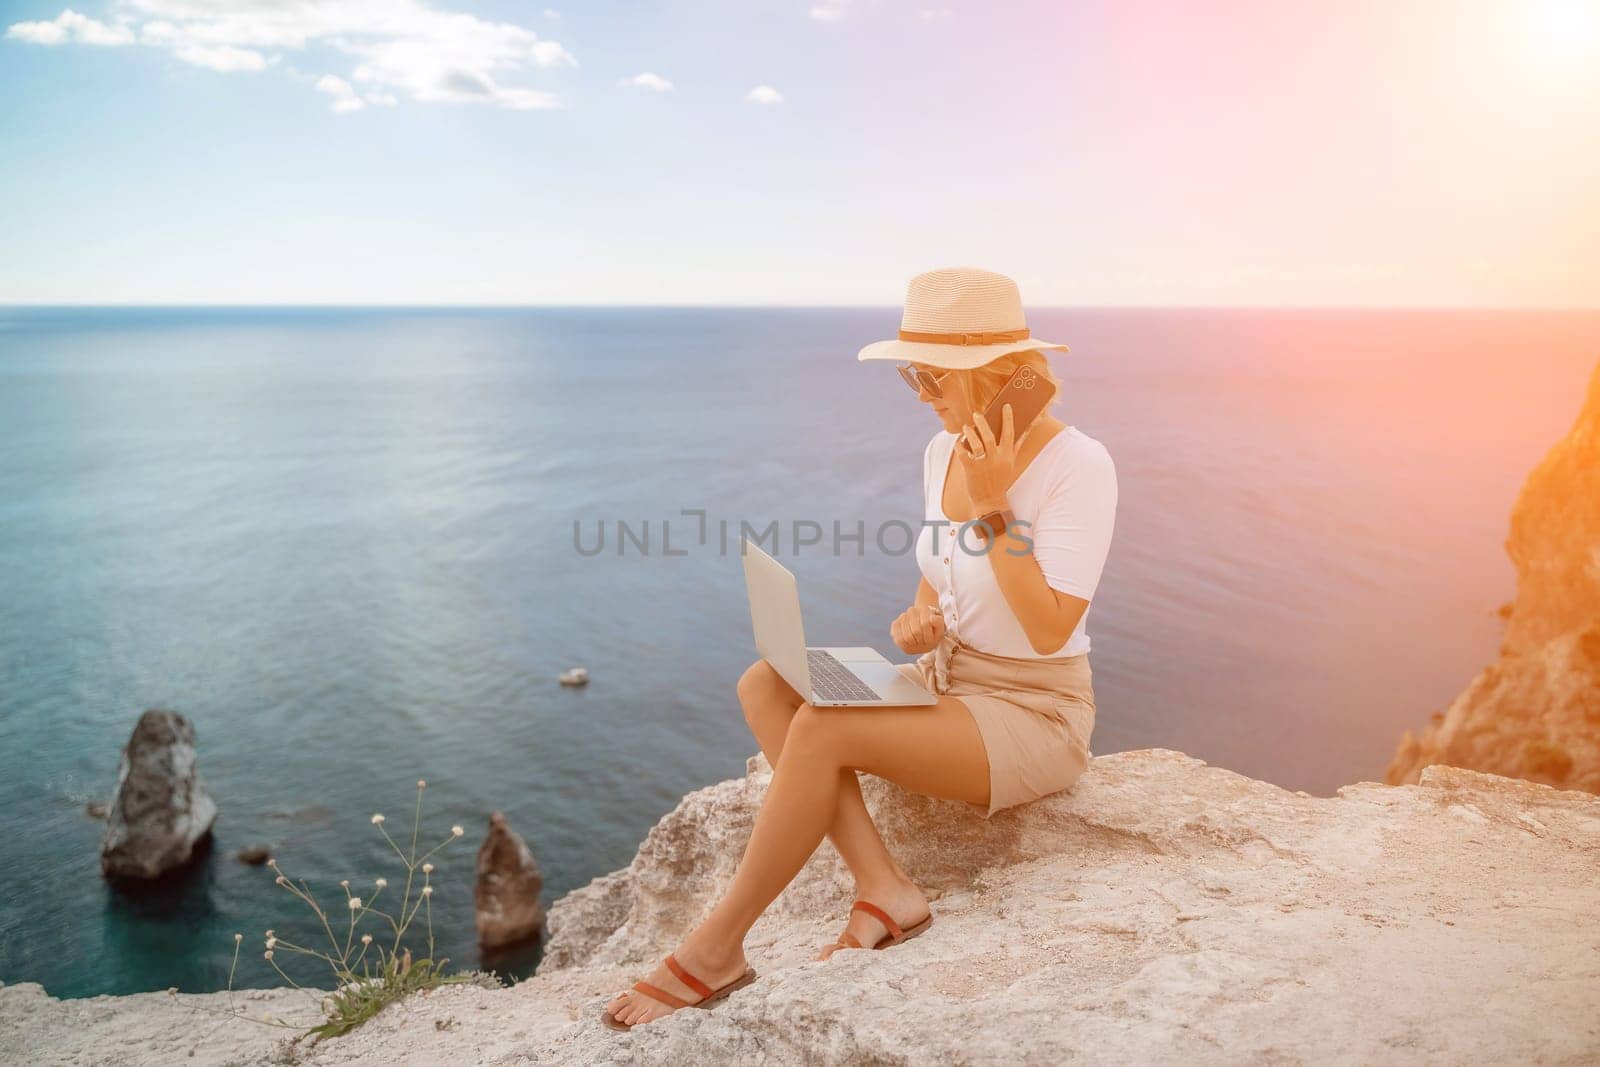 Freelance women sea. She is working on the computer, talking on the phone in the open air with a beautiful view of the sea. The concept of remote work